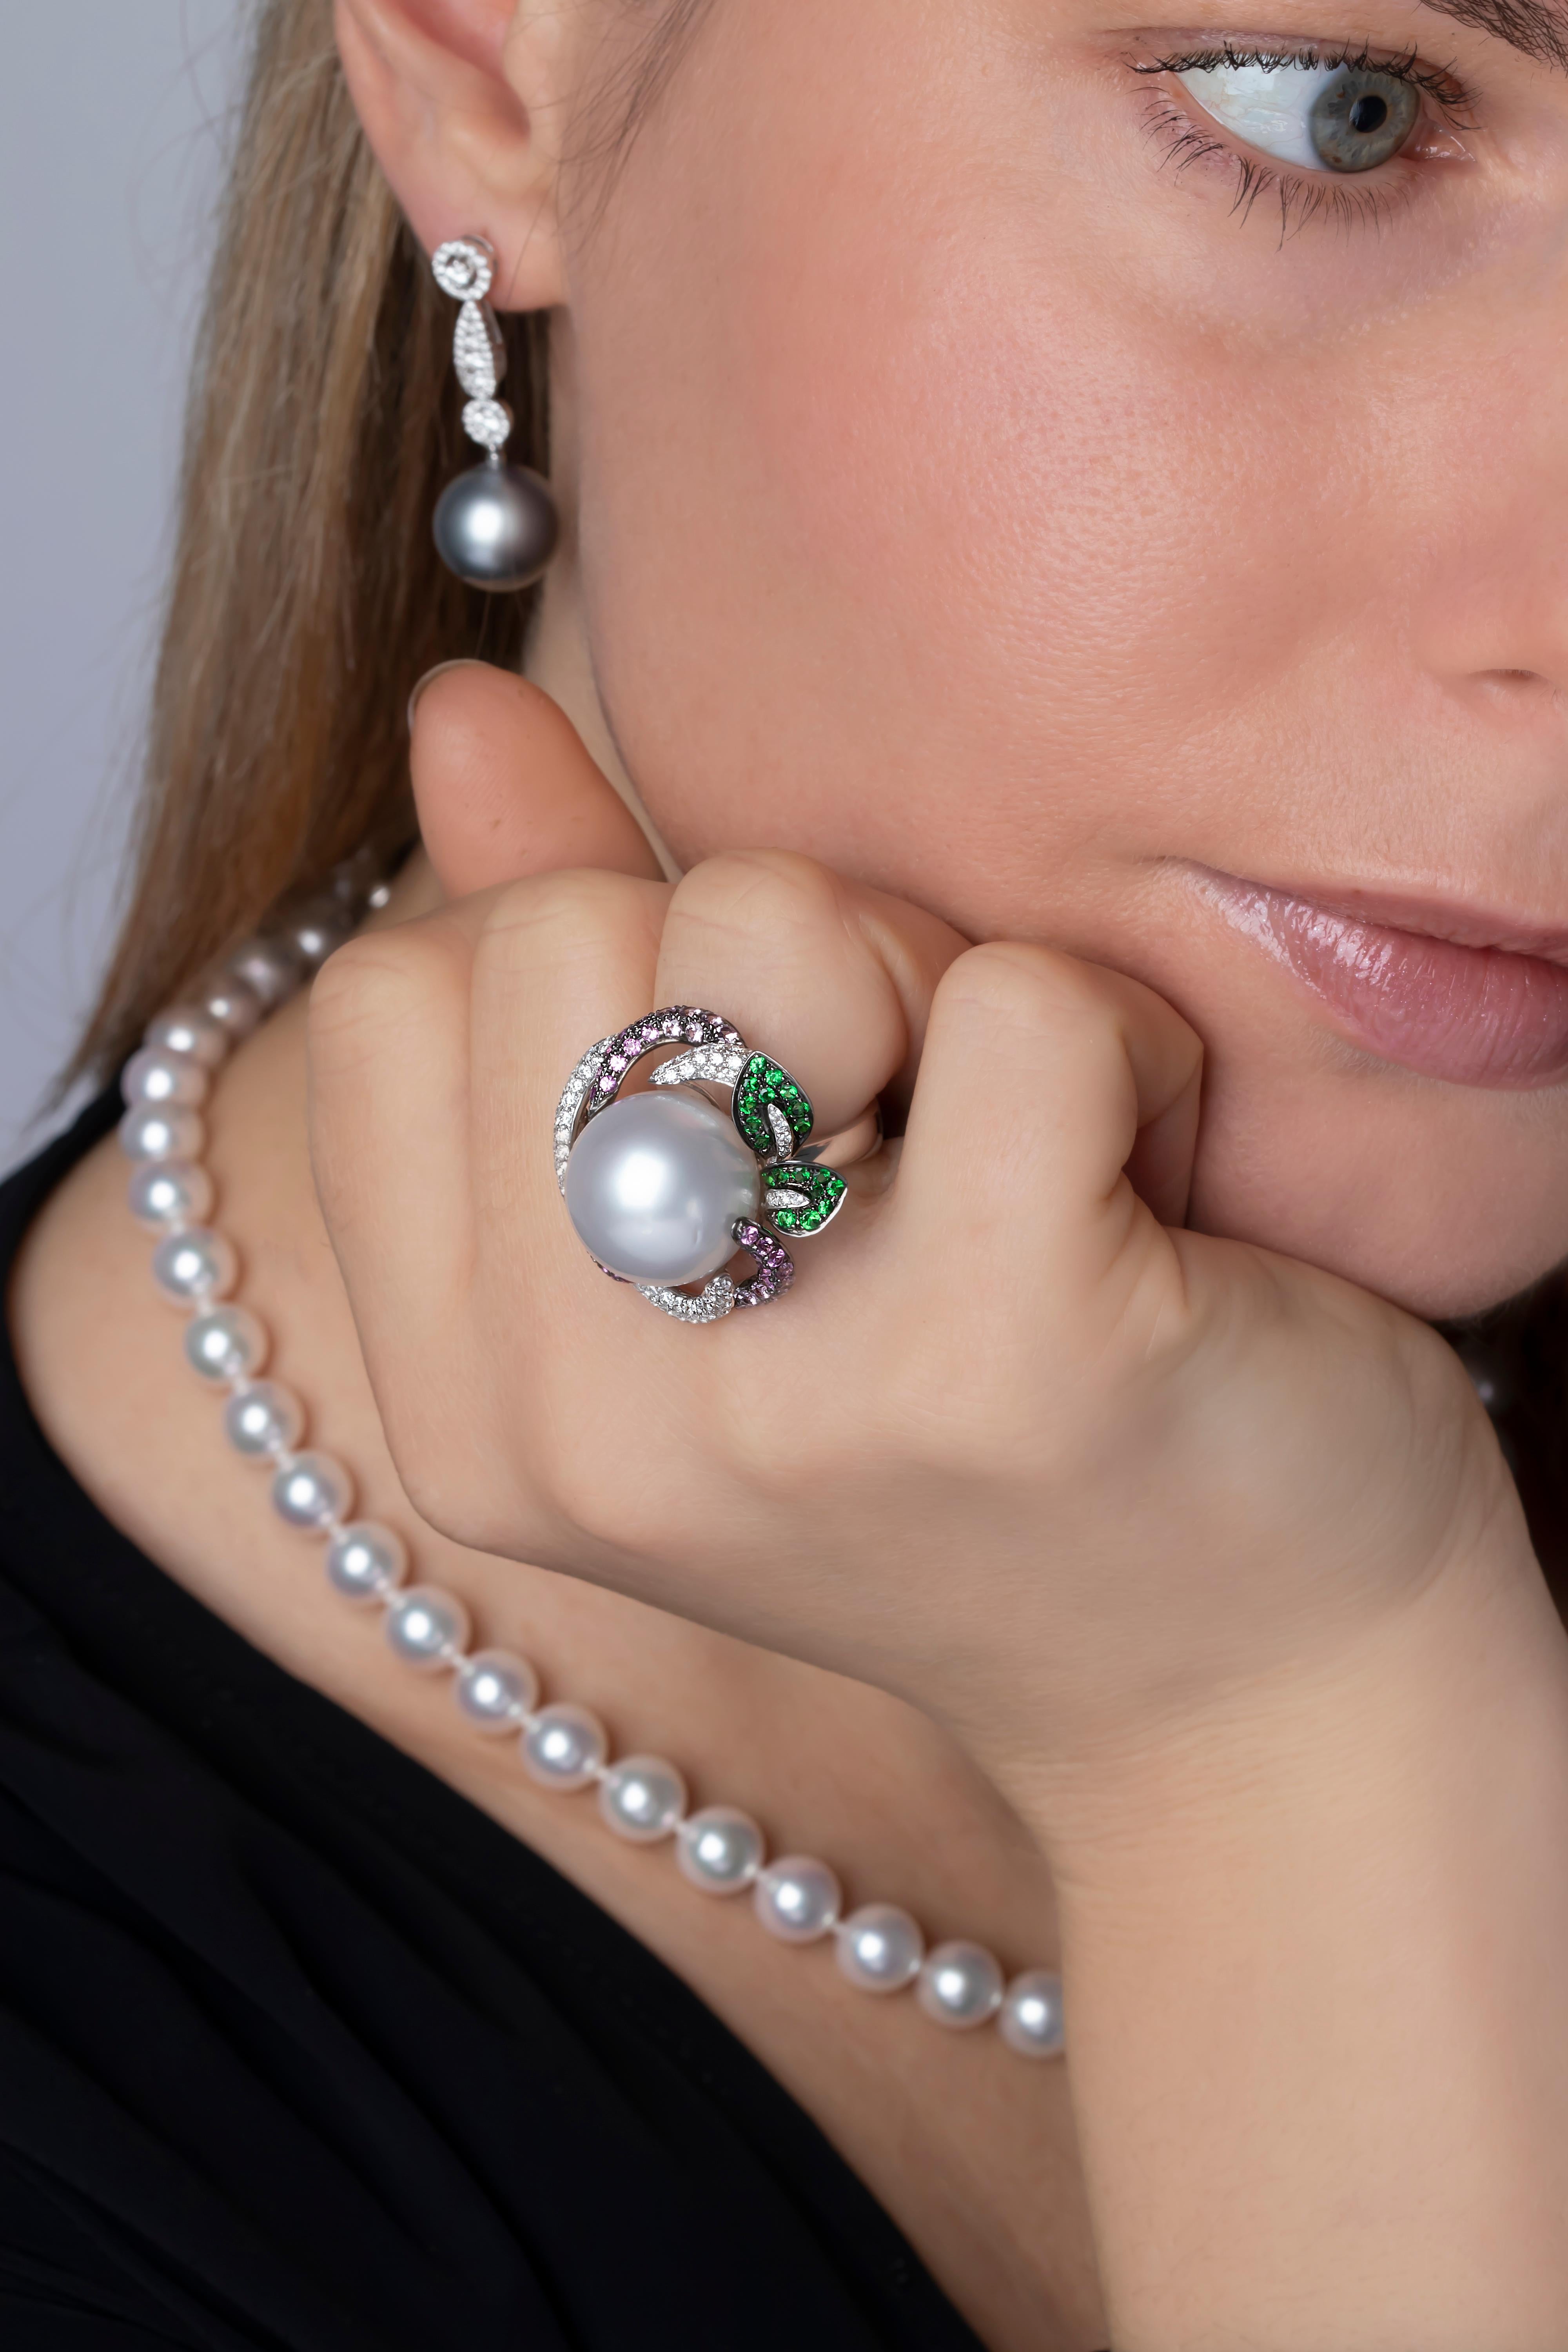 This show-stopping ring by Yoko London features a lustrous South Sea pearl set in the centre of petals comprised of diamonds, pink sapphires and Tsavorite garnets. The vivid colours of the gemstones featured in this ring provide a striking contrast